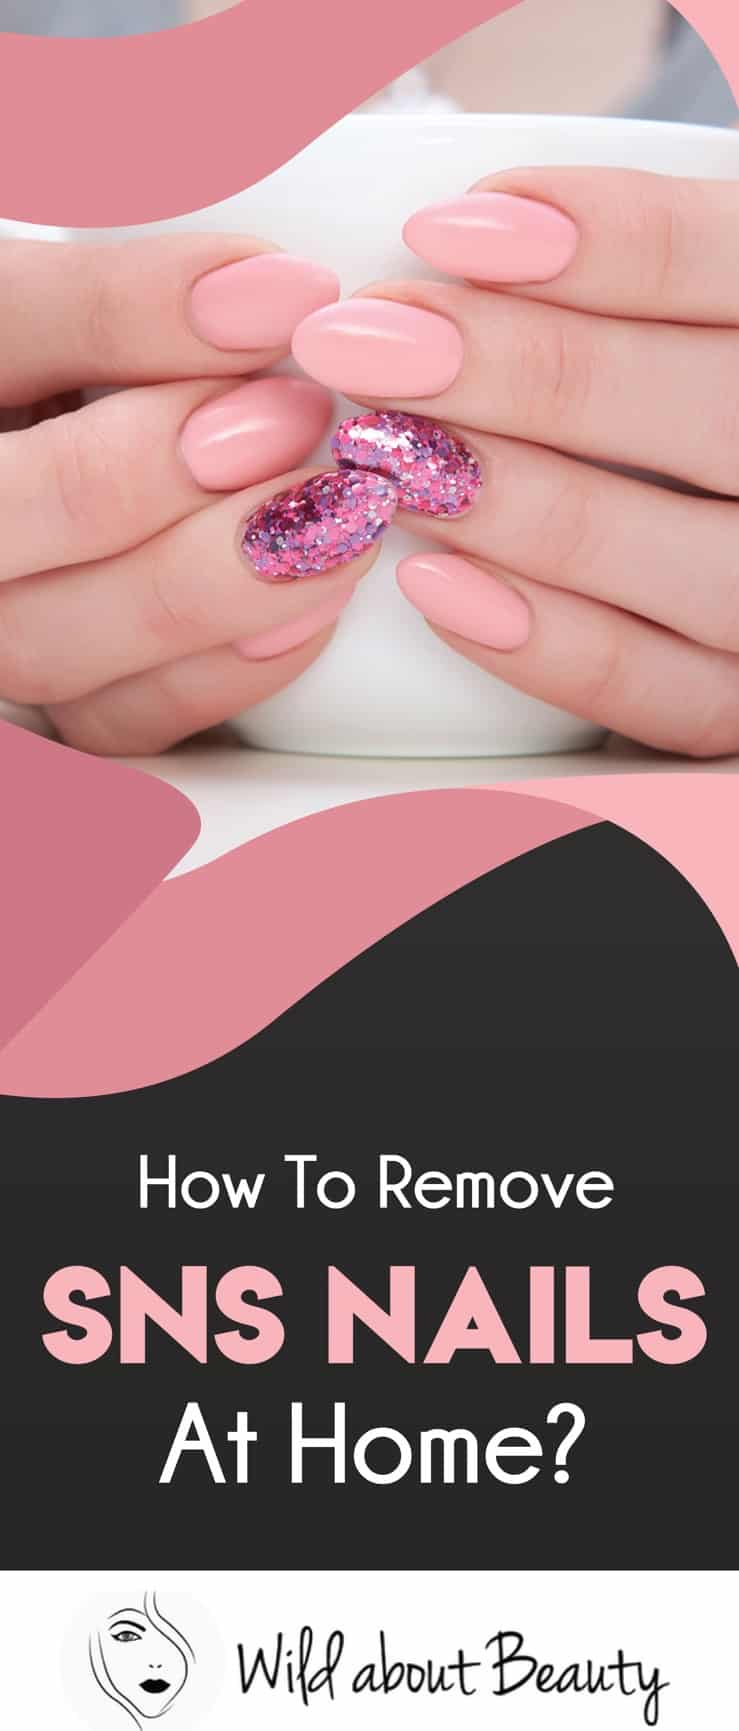 How To Remove SNS Nails At Home